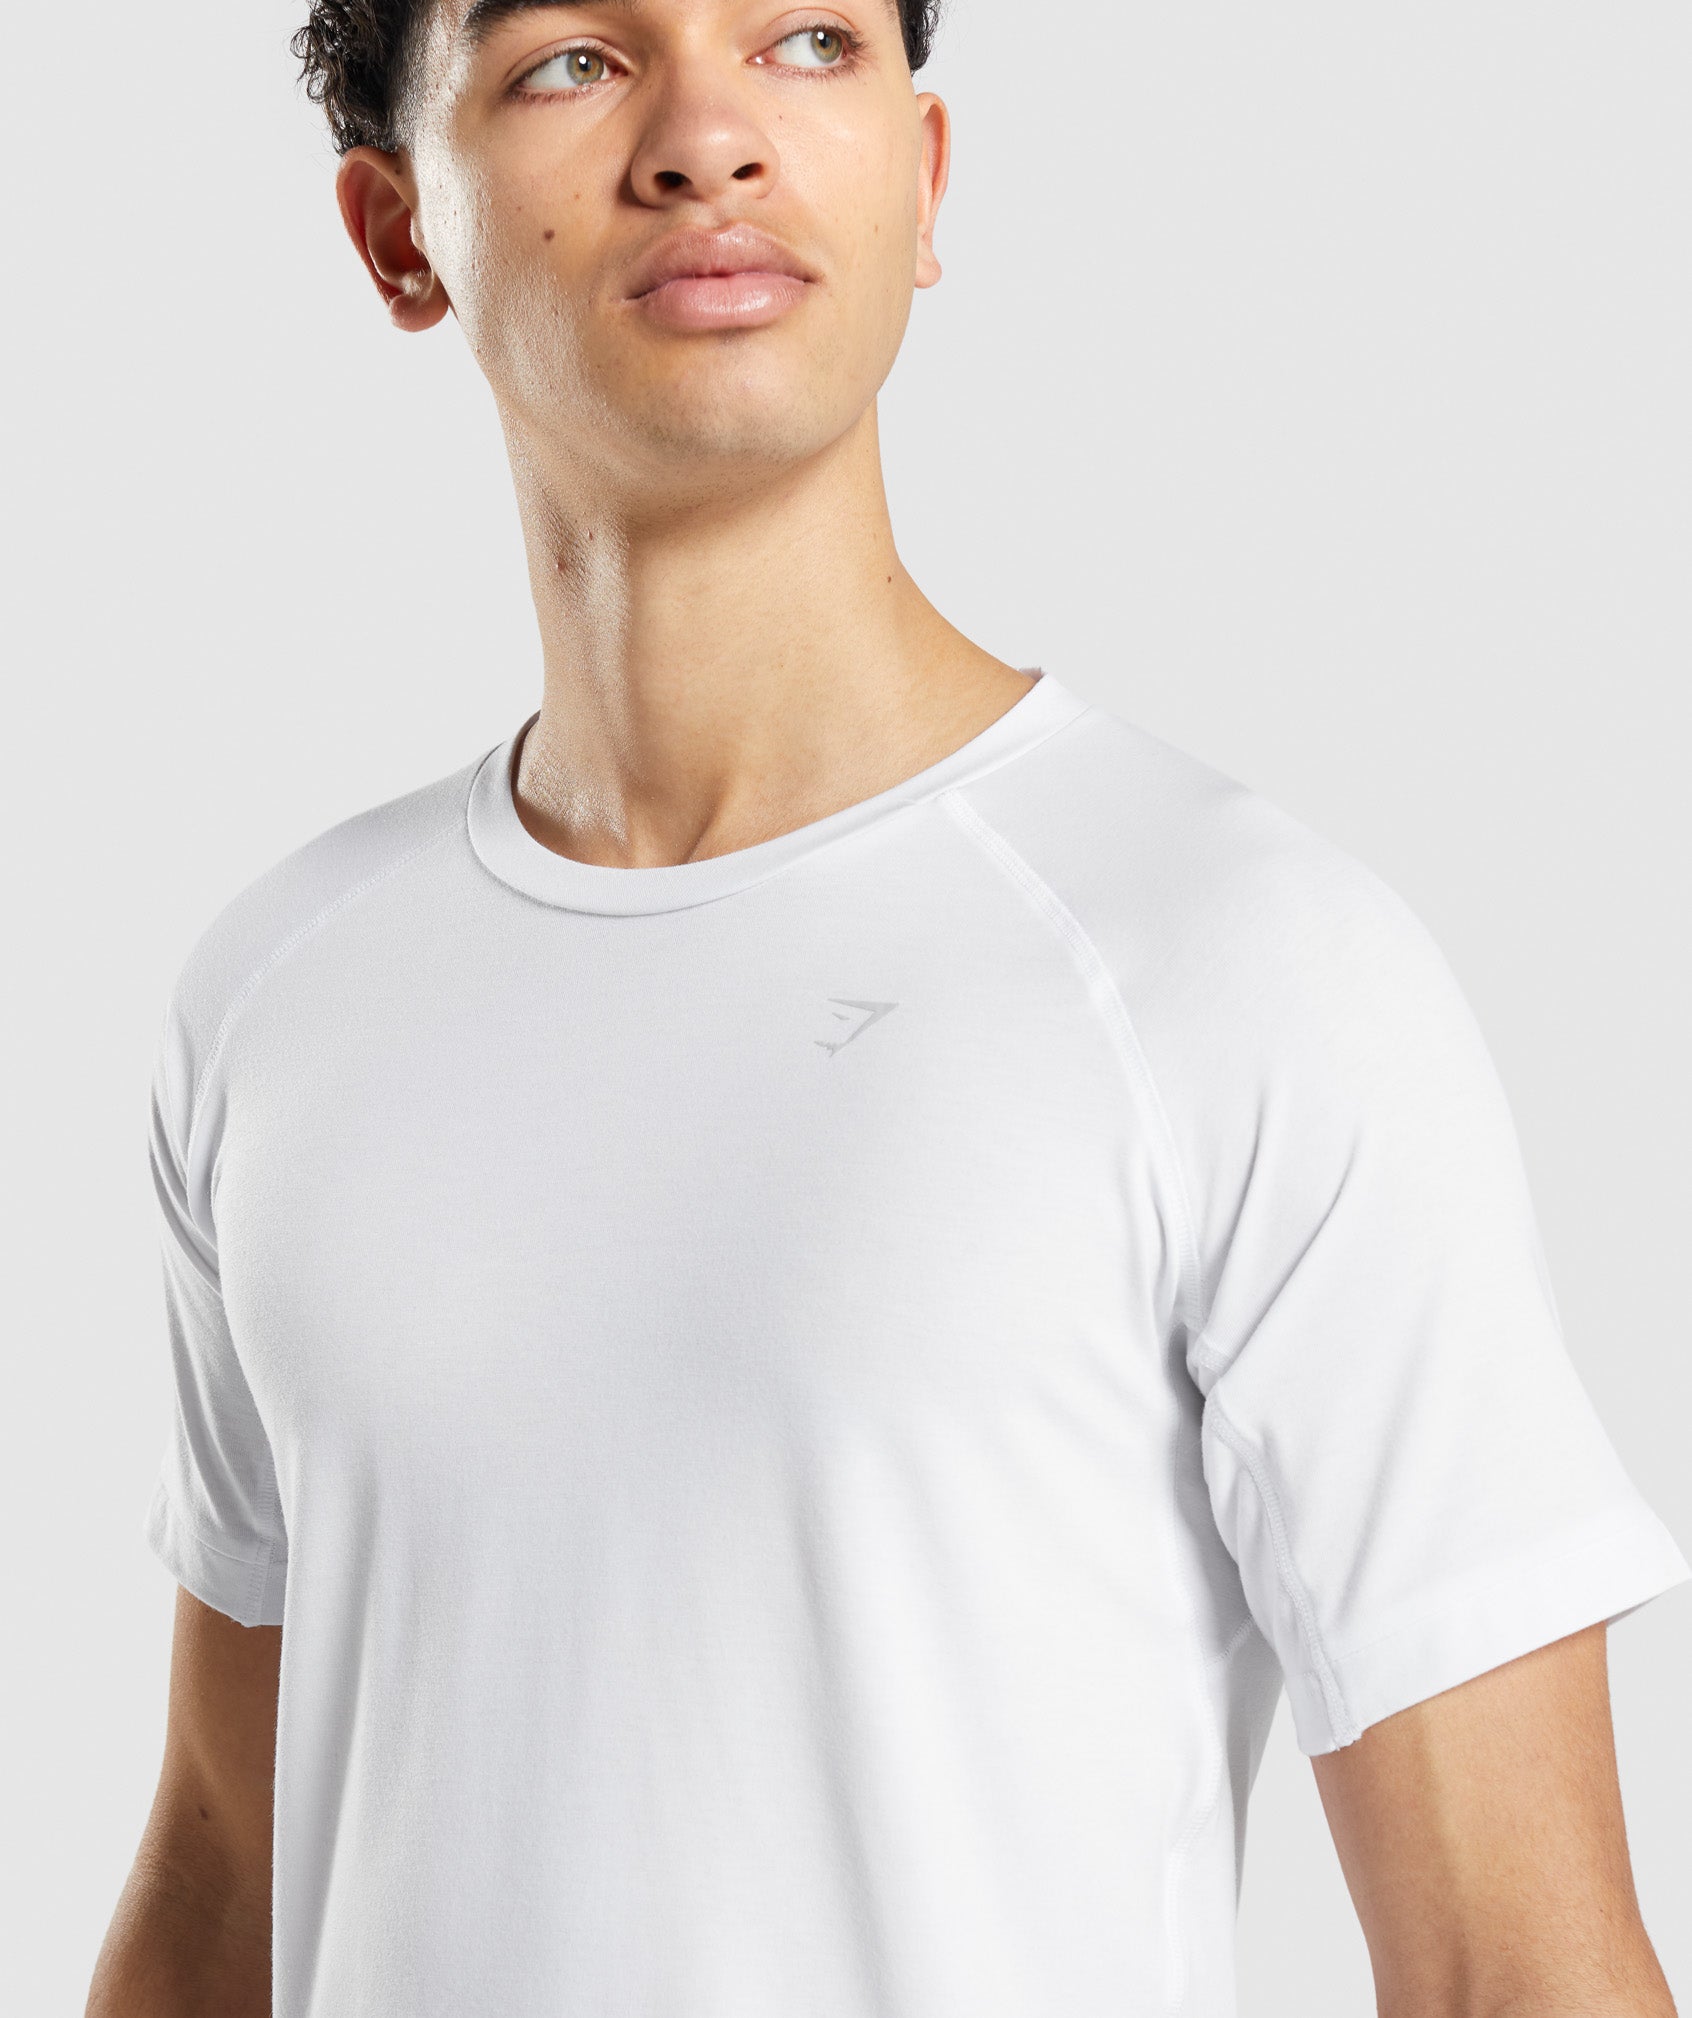 Studio Amplify T-Shirt in White - view 5